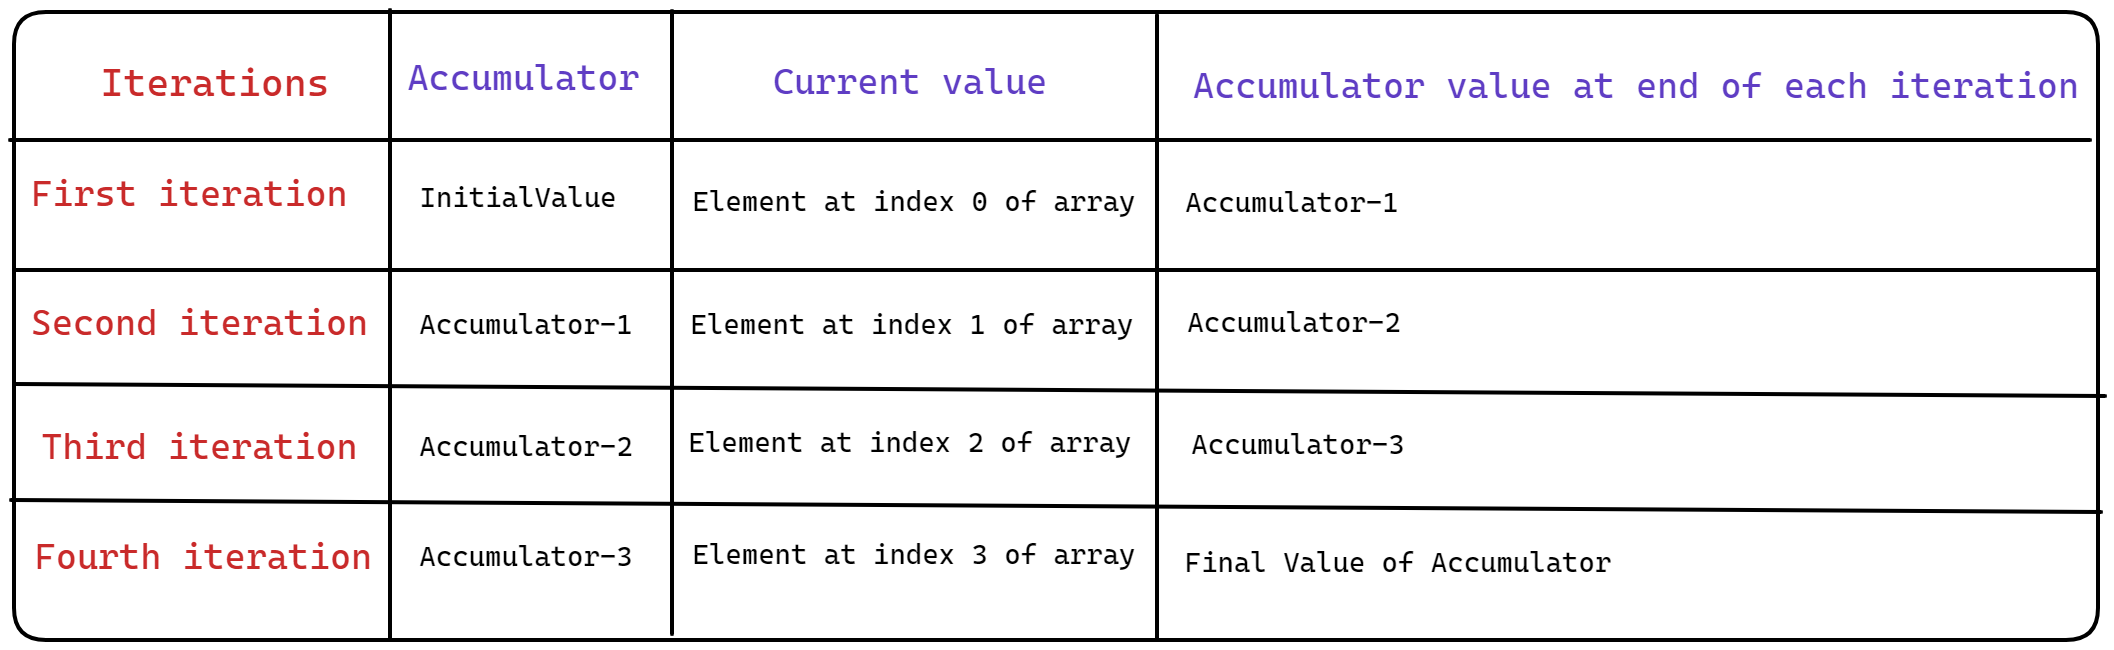 diagram explaining how current value and accumulator changes during each iteration when initial value is present.